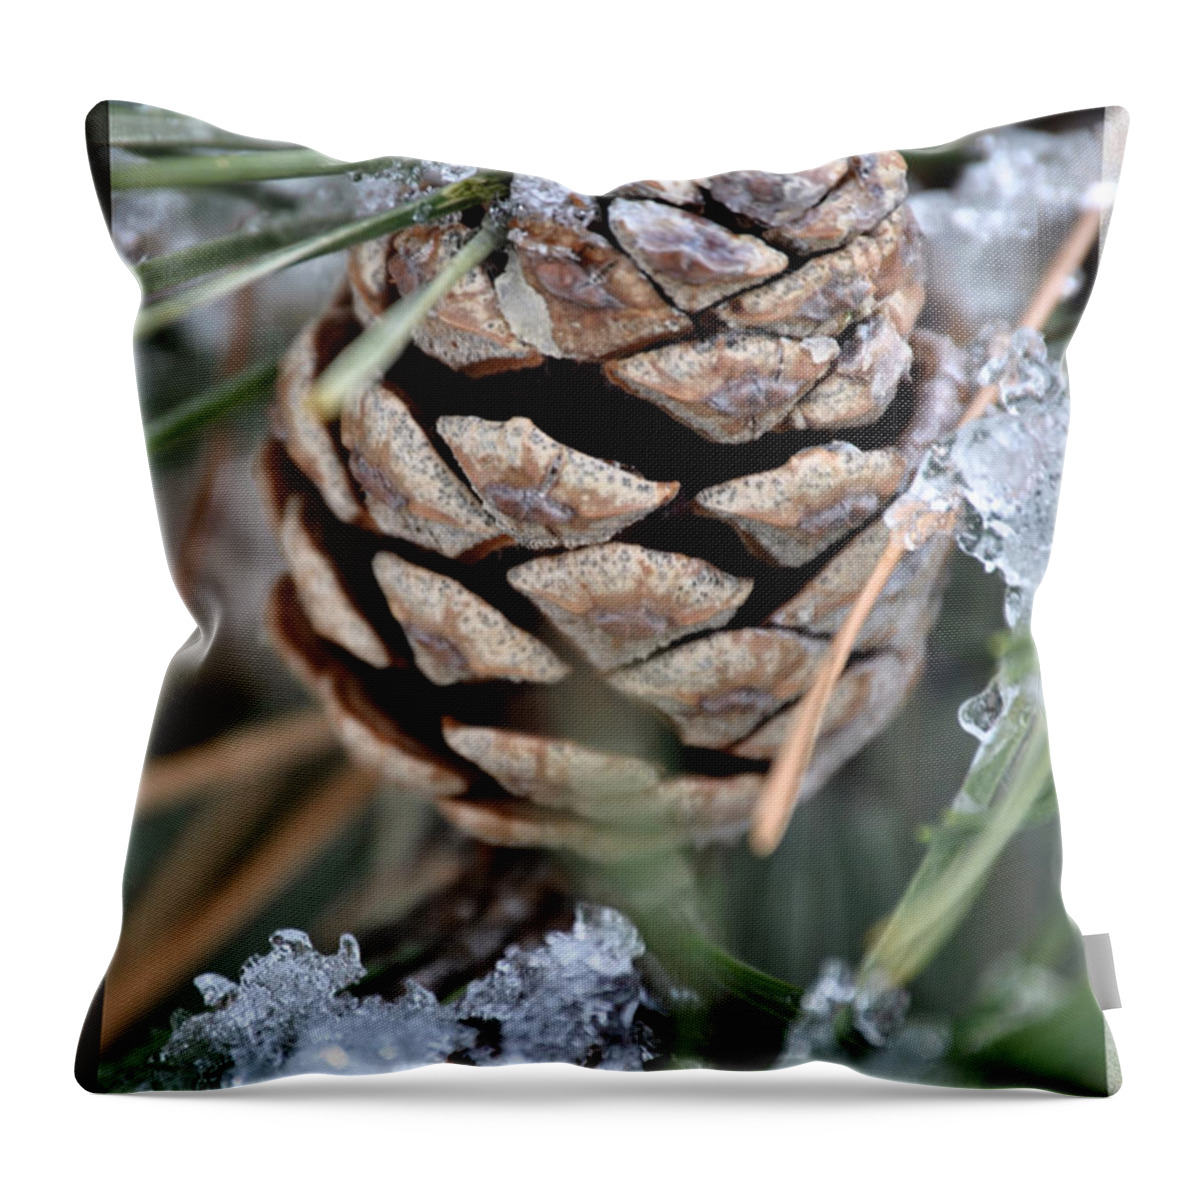 Snow Throw Pillow featuring the photograph Icy Acorns by Michael Frank Jr